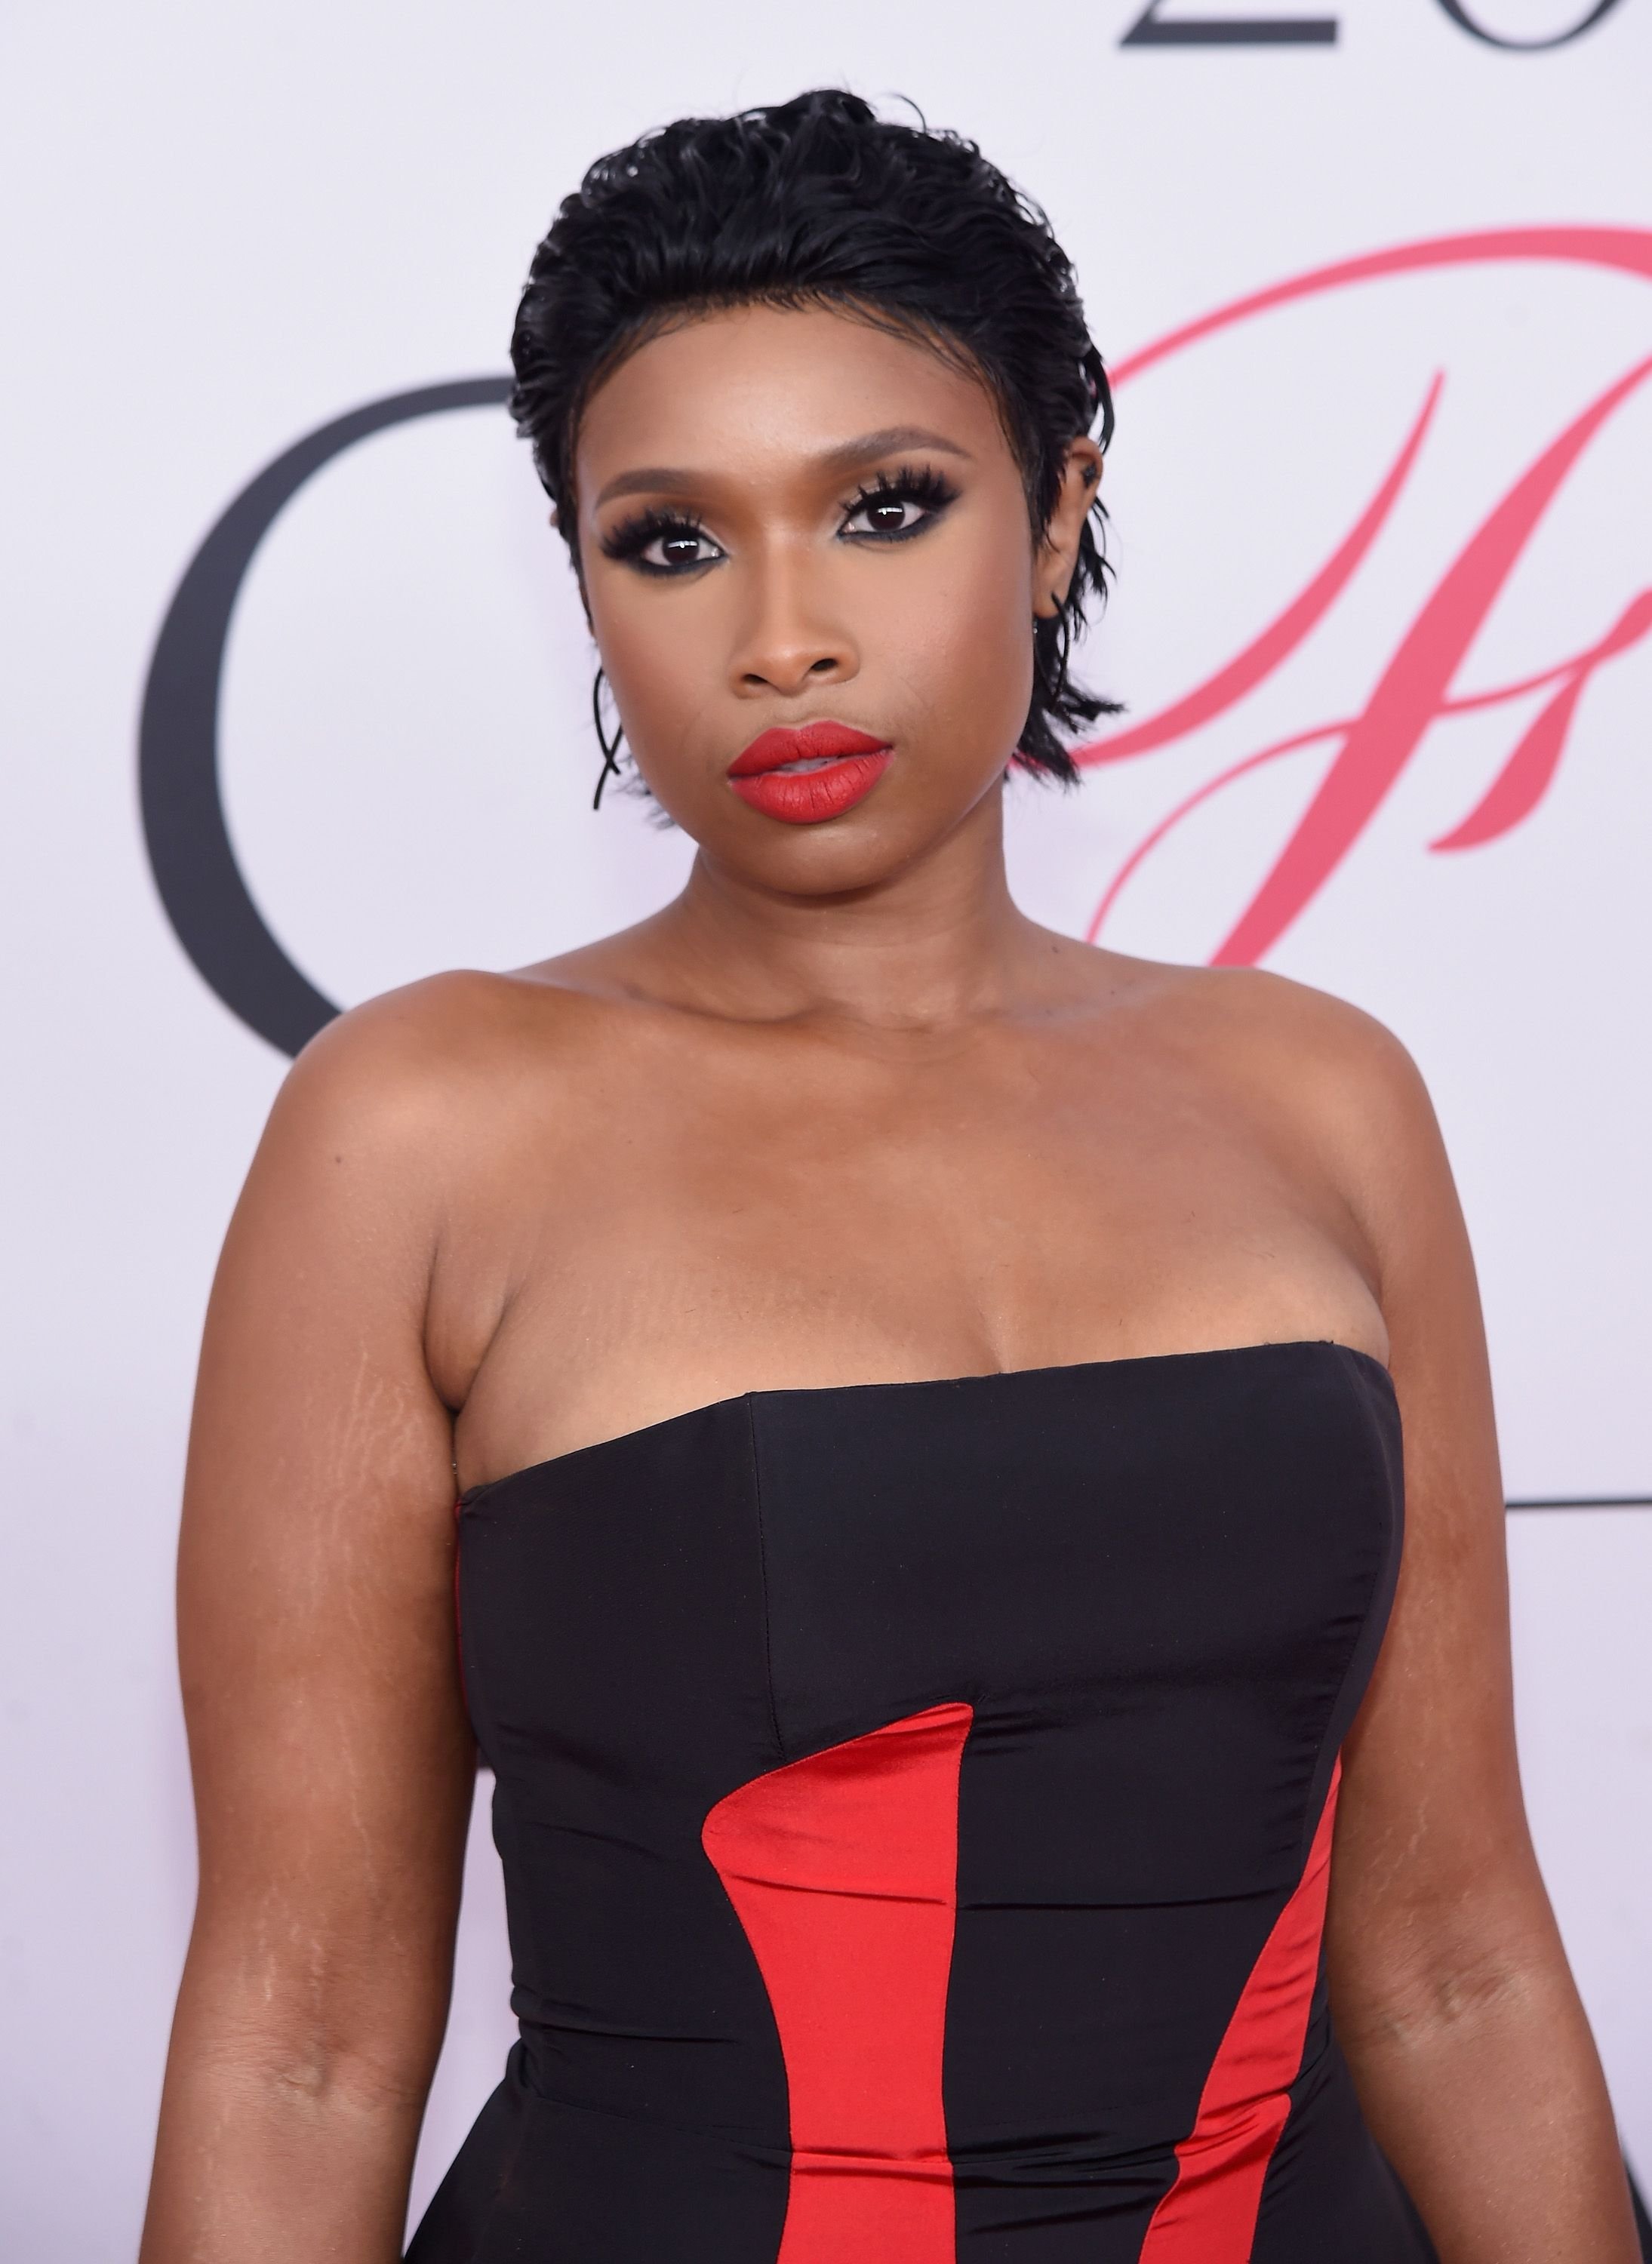 Jennifer Hudson at the 2016 CFDA Fashion Awards at the Hammerstein Ballroom on June 6, 2016 in New York City | Photo: Getty Images  